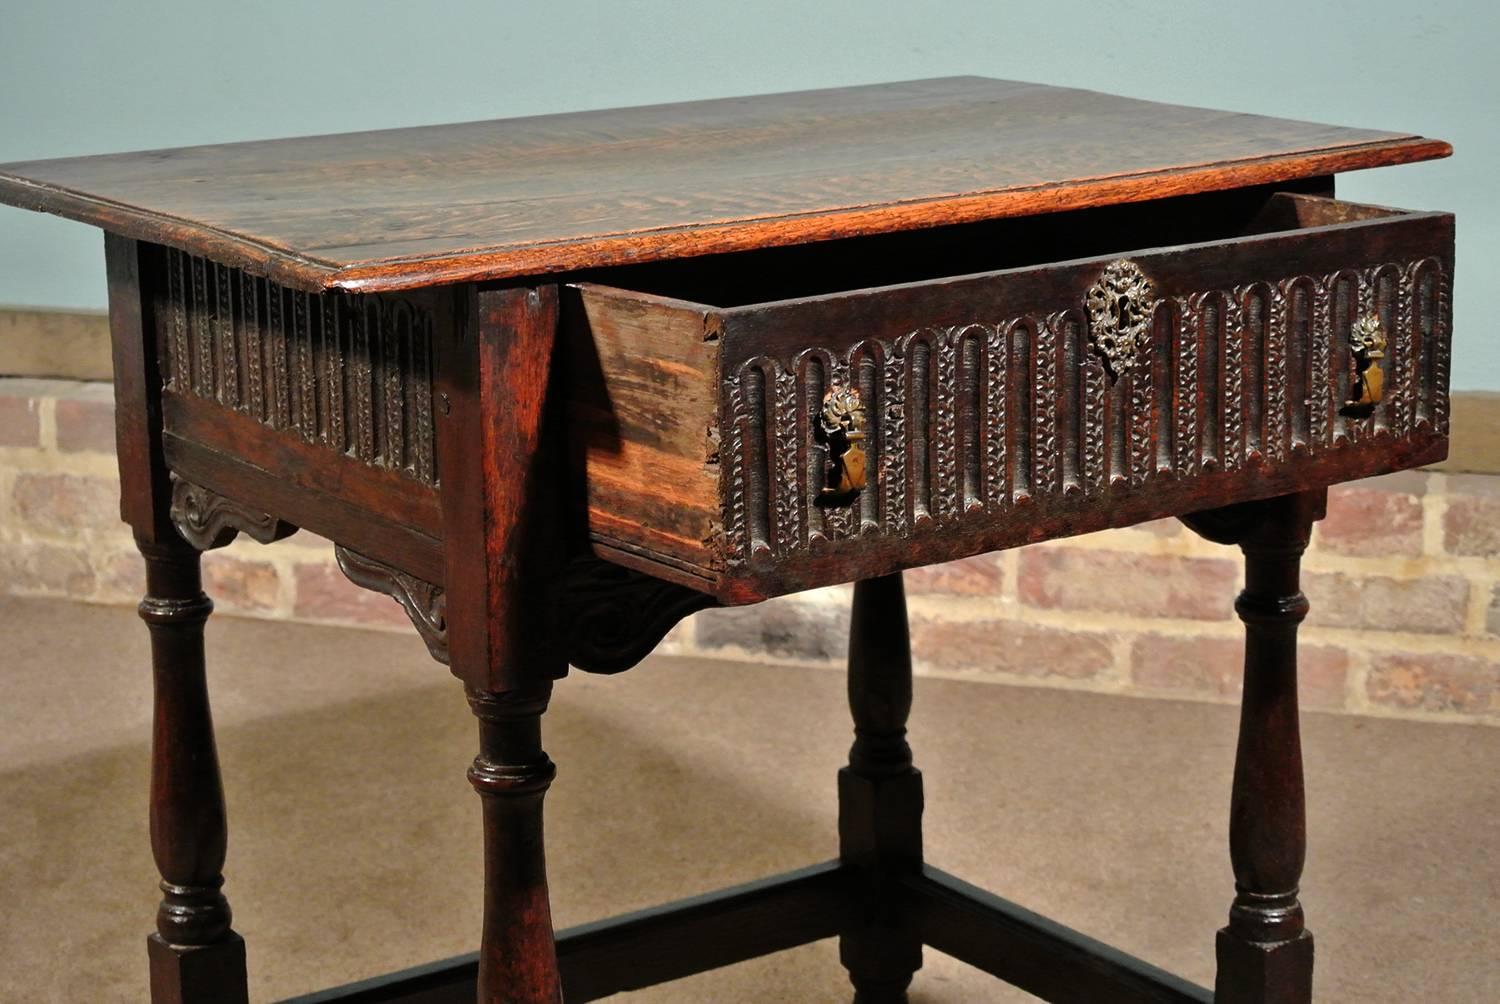 British Early 17th Century Oak Lowboy with Provenance from Groombridge Place in Kent